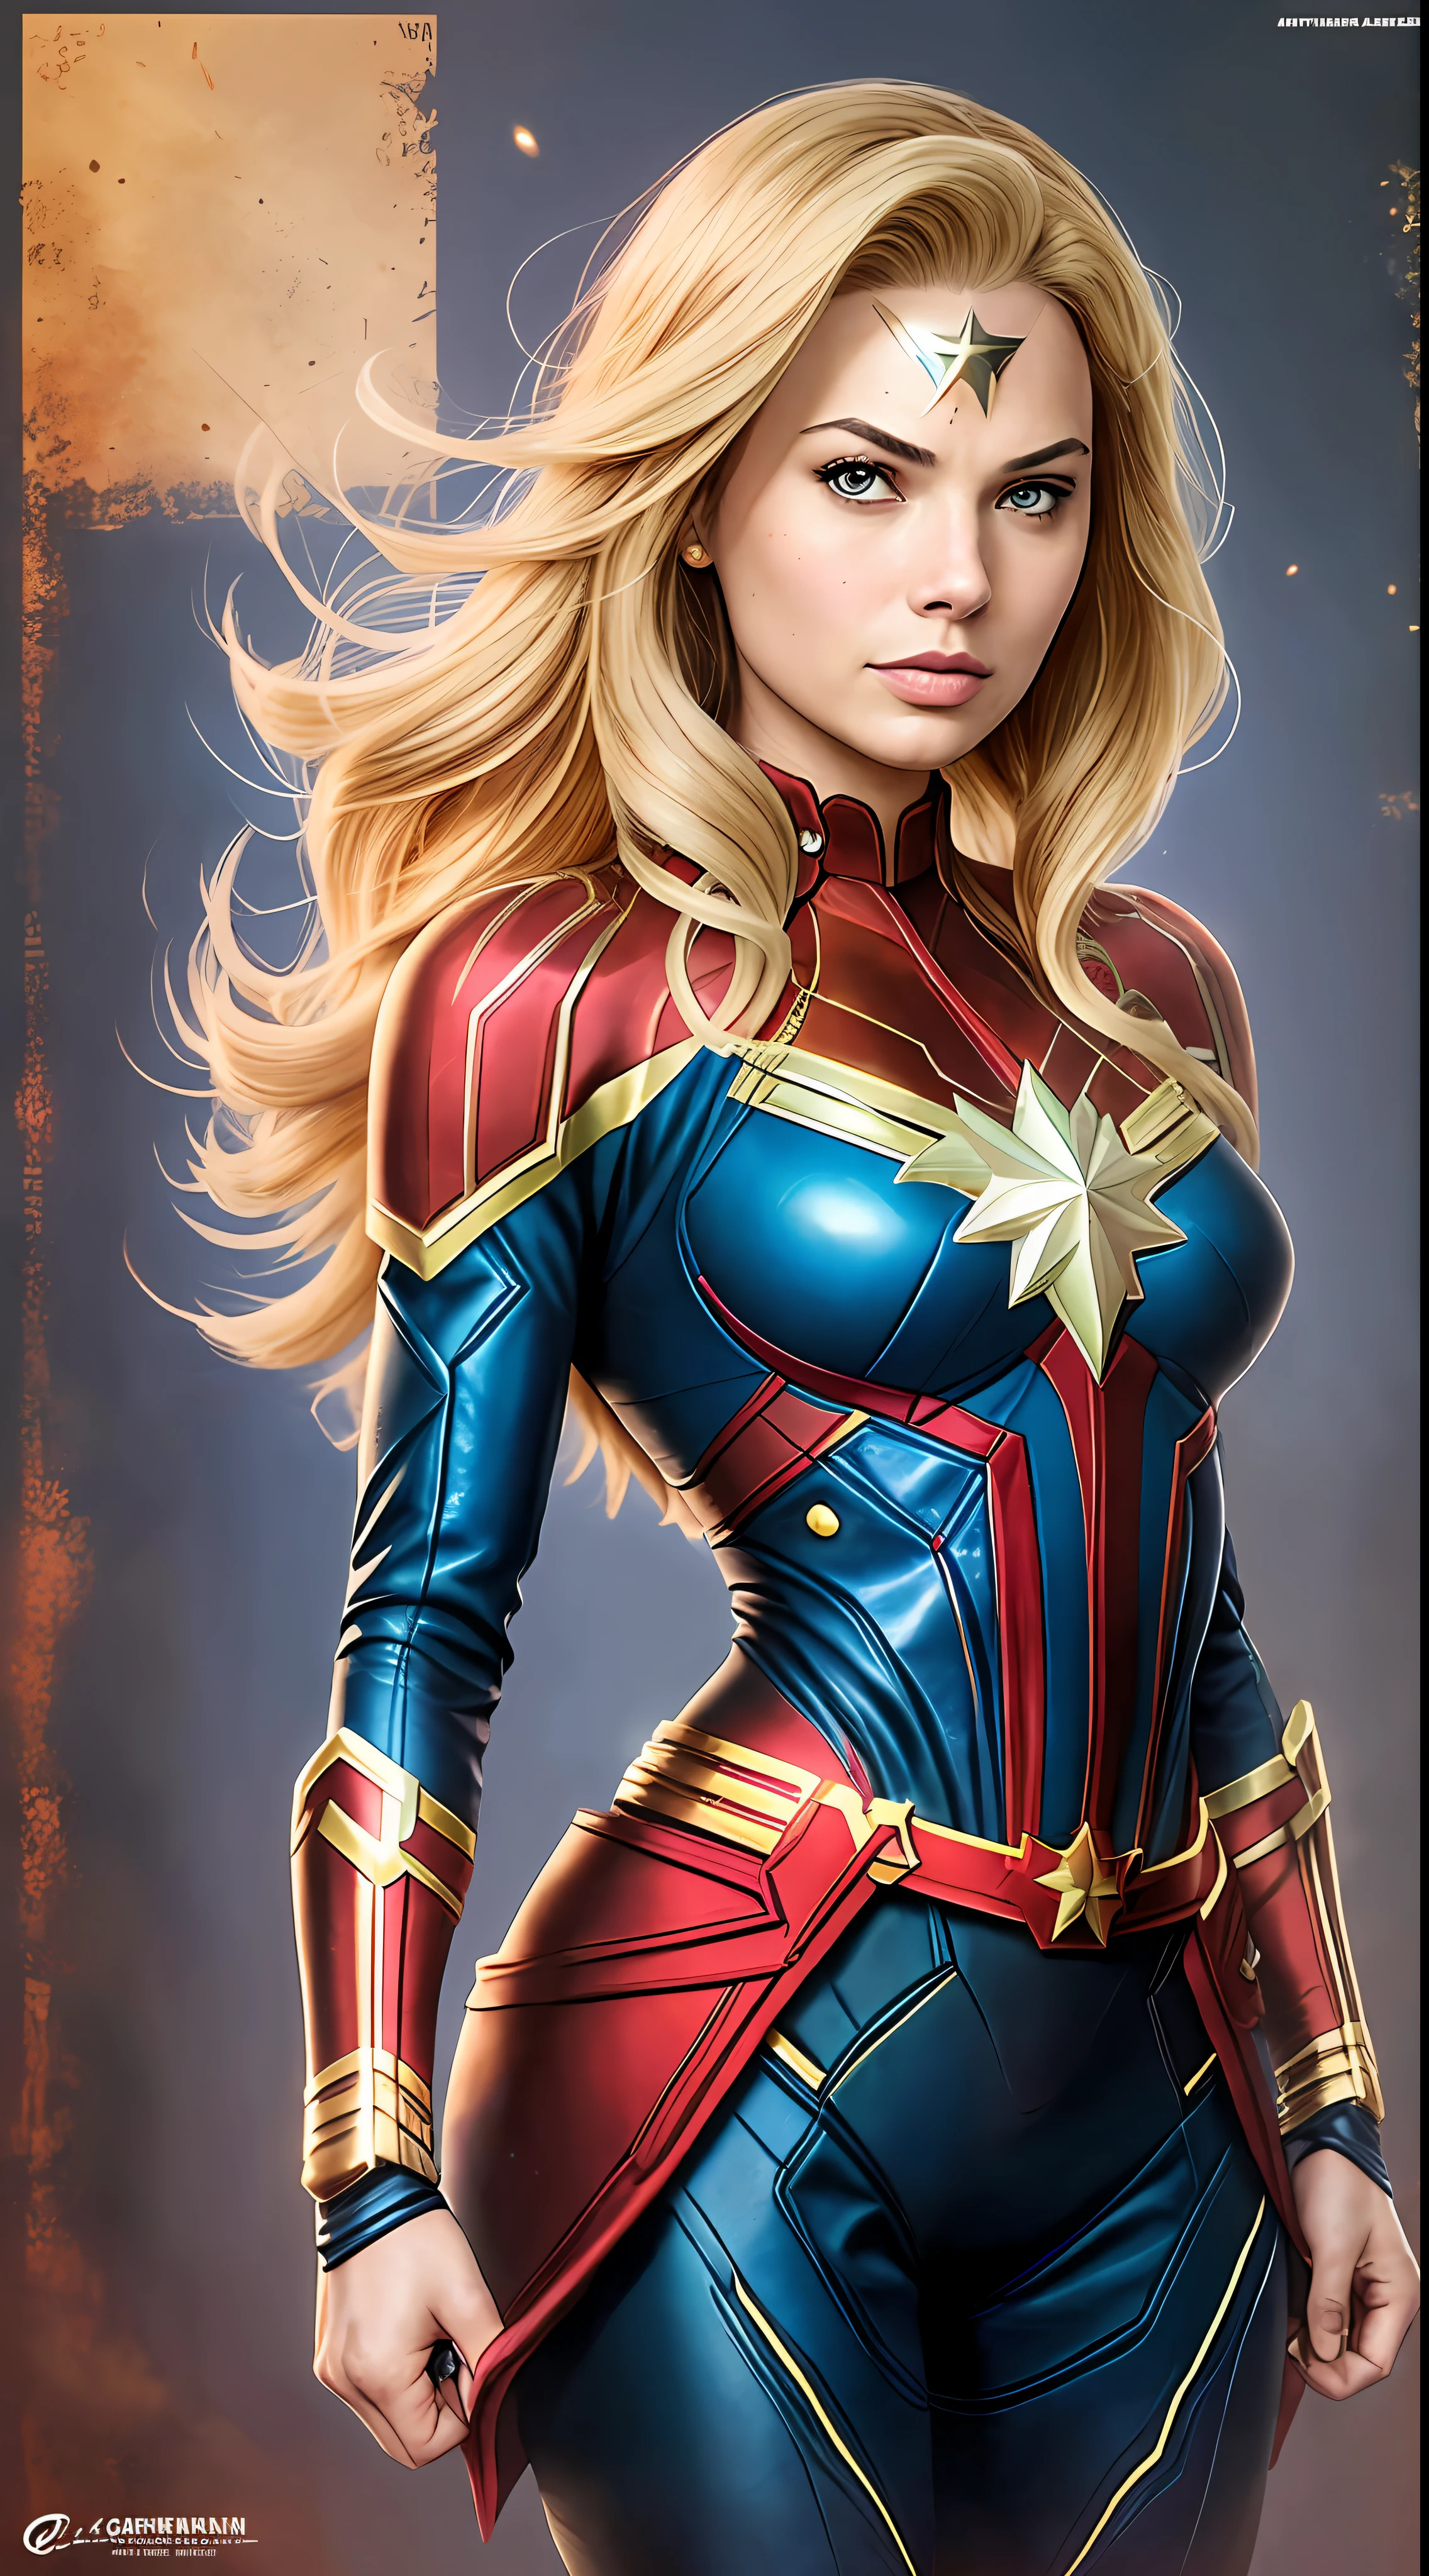 a woman in a red and blue costume is posing for a picture, margot robbie as wonder woman, in style of marvel and dc, in the style artgerm, artgerm comic, vestida como Wonder Woman, Captain Marvel, Wonder Woman, artgerm jsc, DC vs Moda Marvel, as seen on artgerm, gal gadot as captain marvel